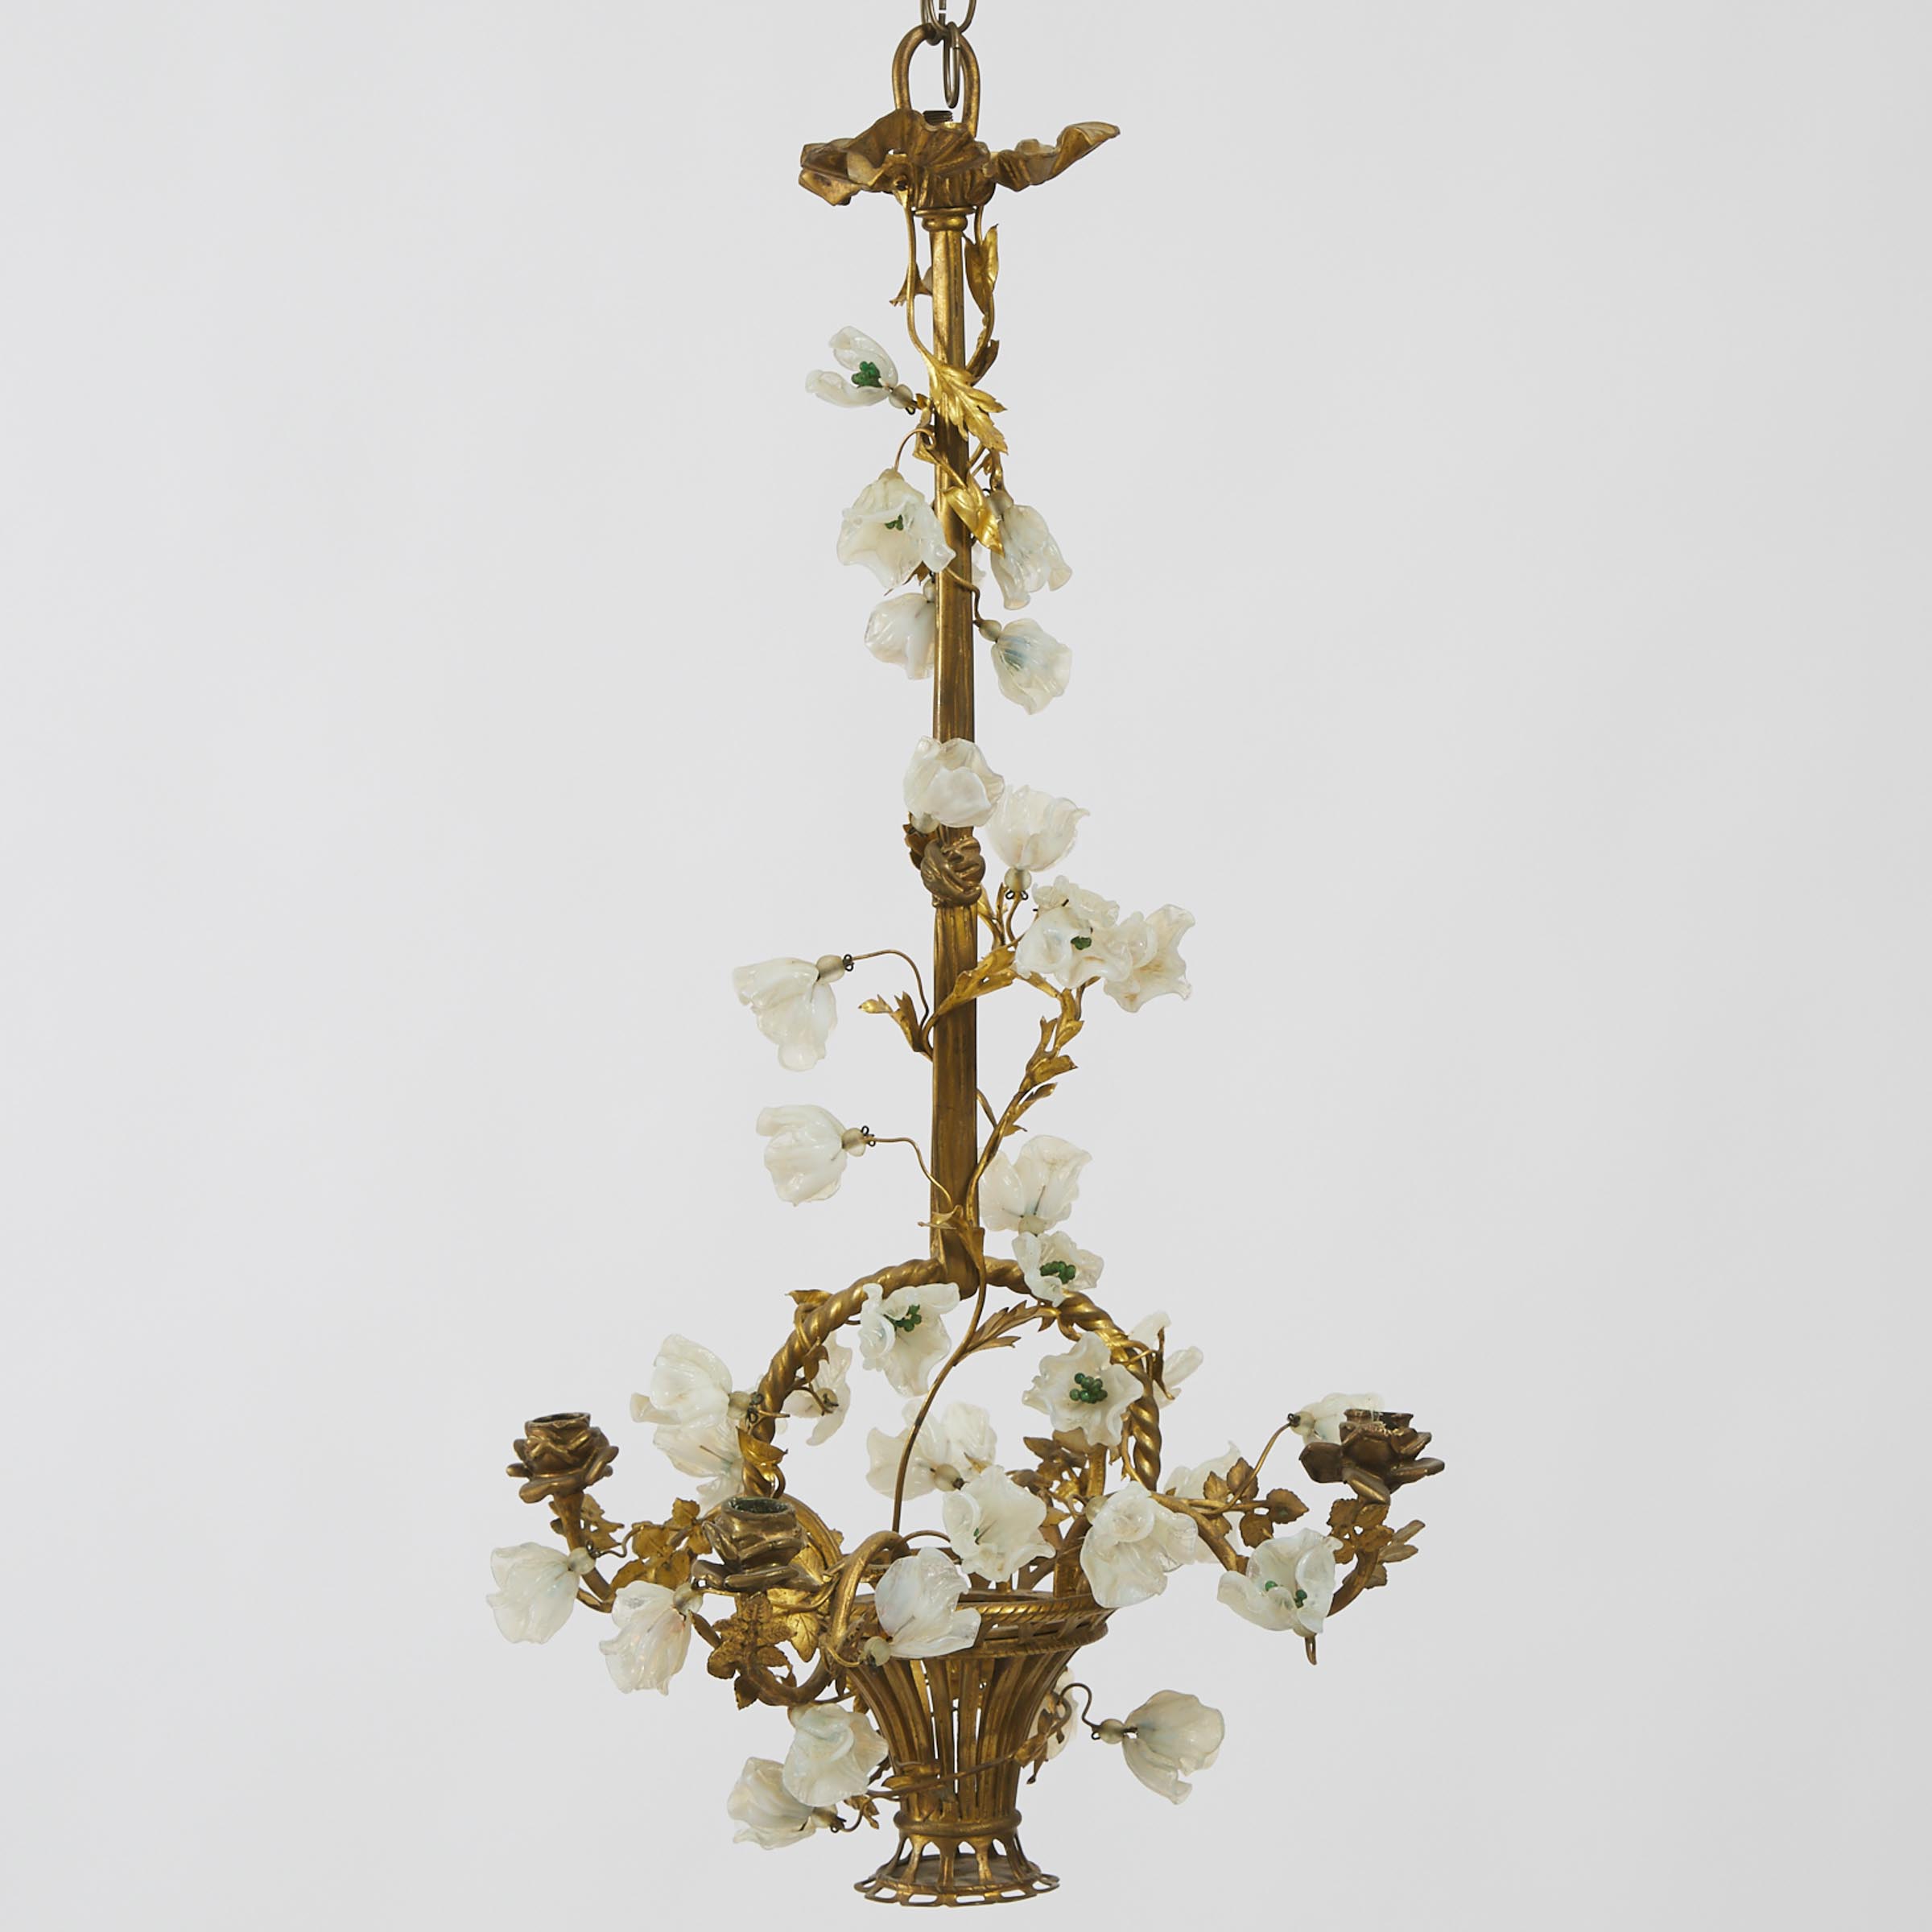 French Opalescent Glass Mounted Gilt Bronze Chandelier, 19th century